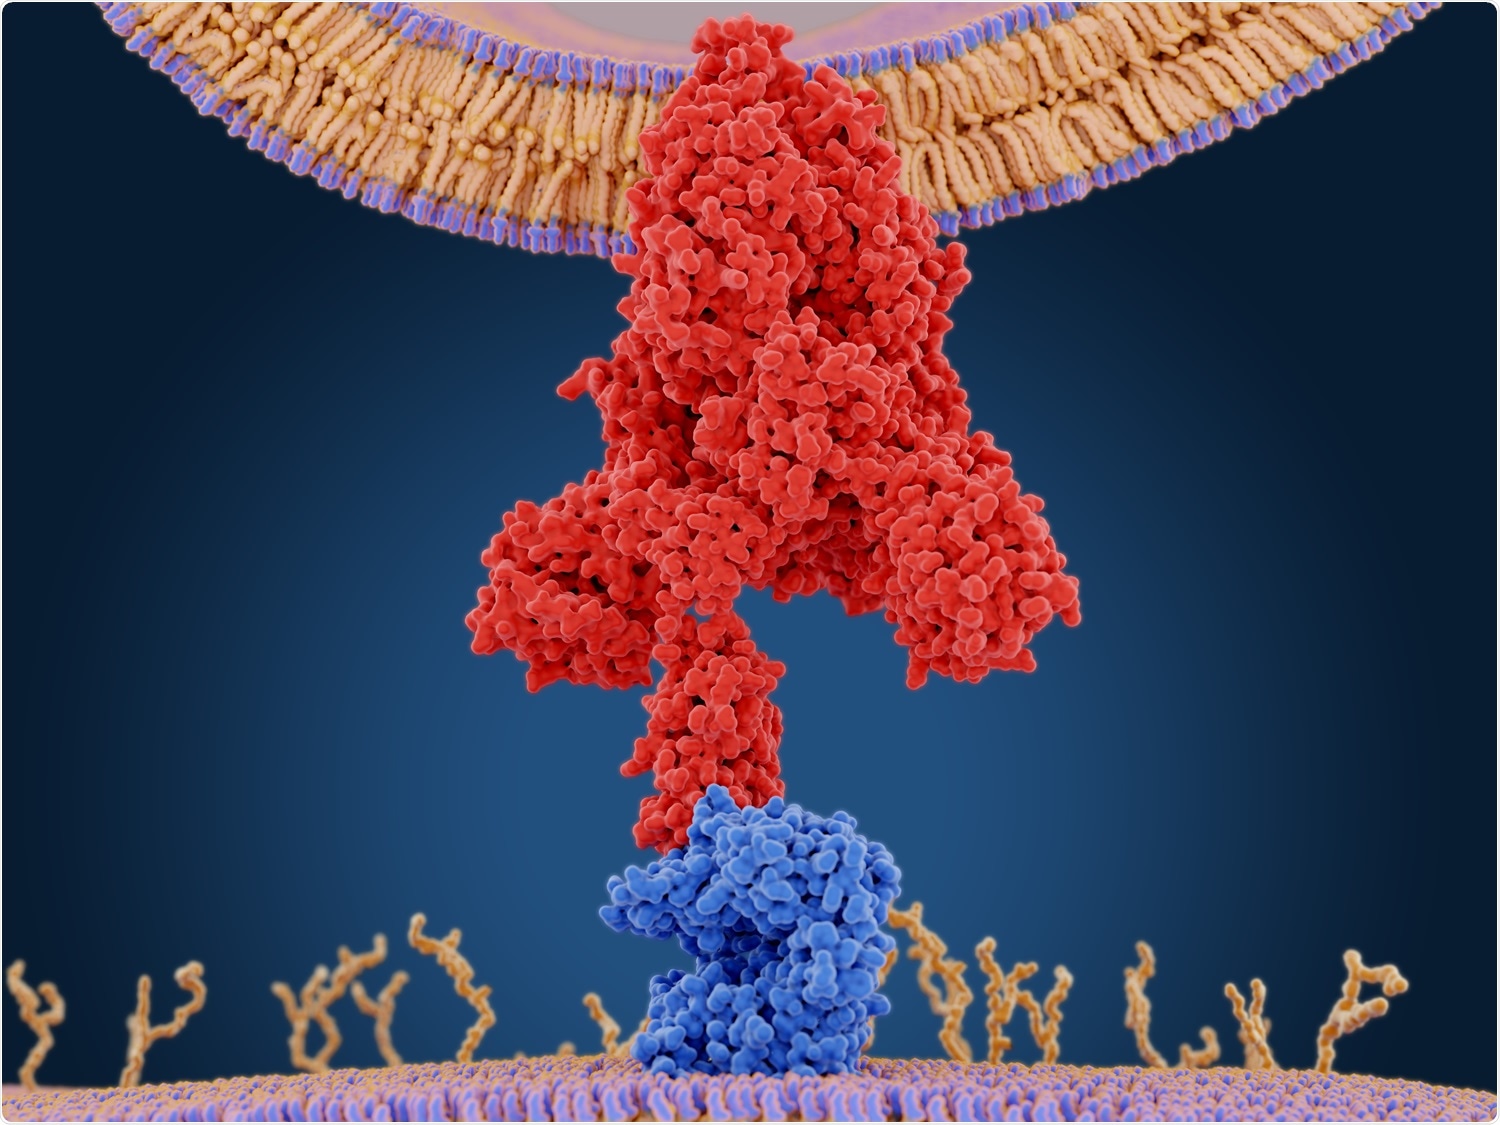 Study: Broad ultra-potent neutralization of SARS-CoV-2 variants by monoclonal antibodies specific to the tip of RBD. Image Credit: Juan Gaertner / Shutterstock